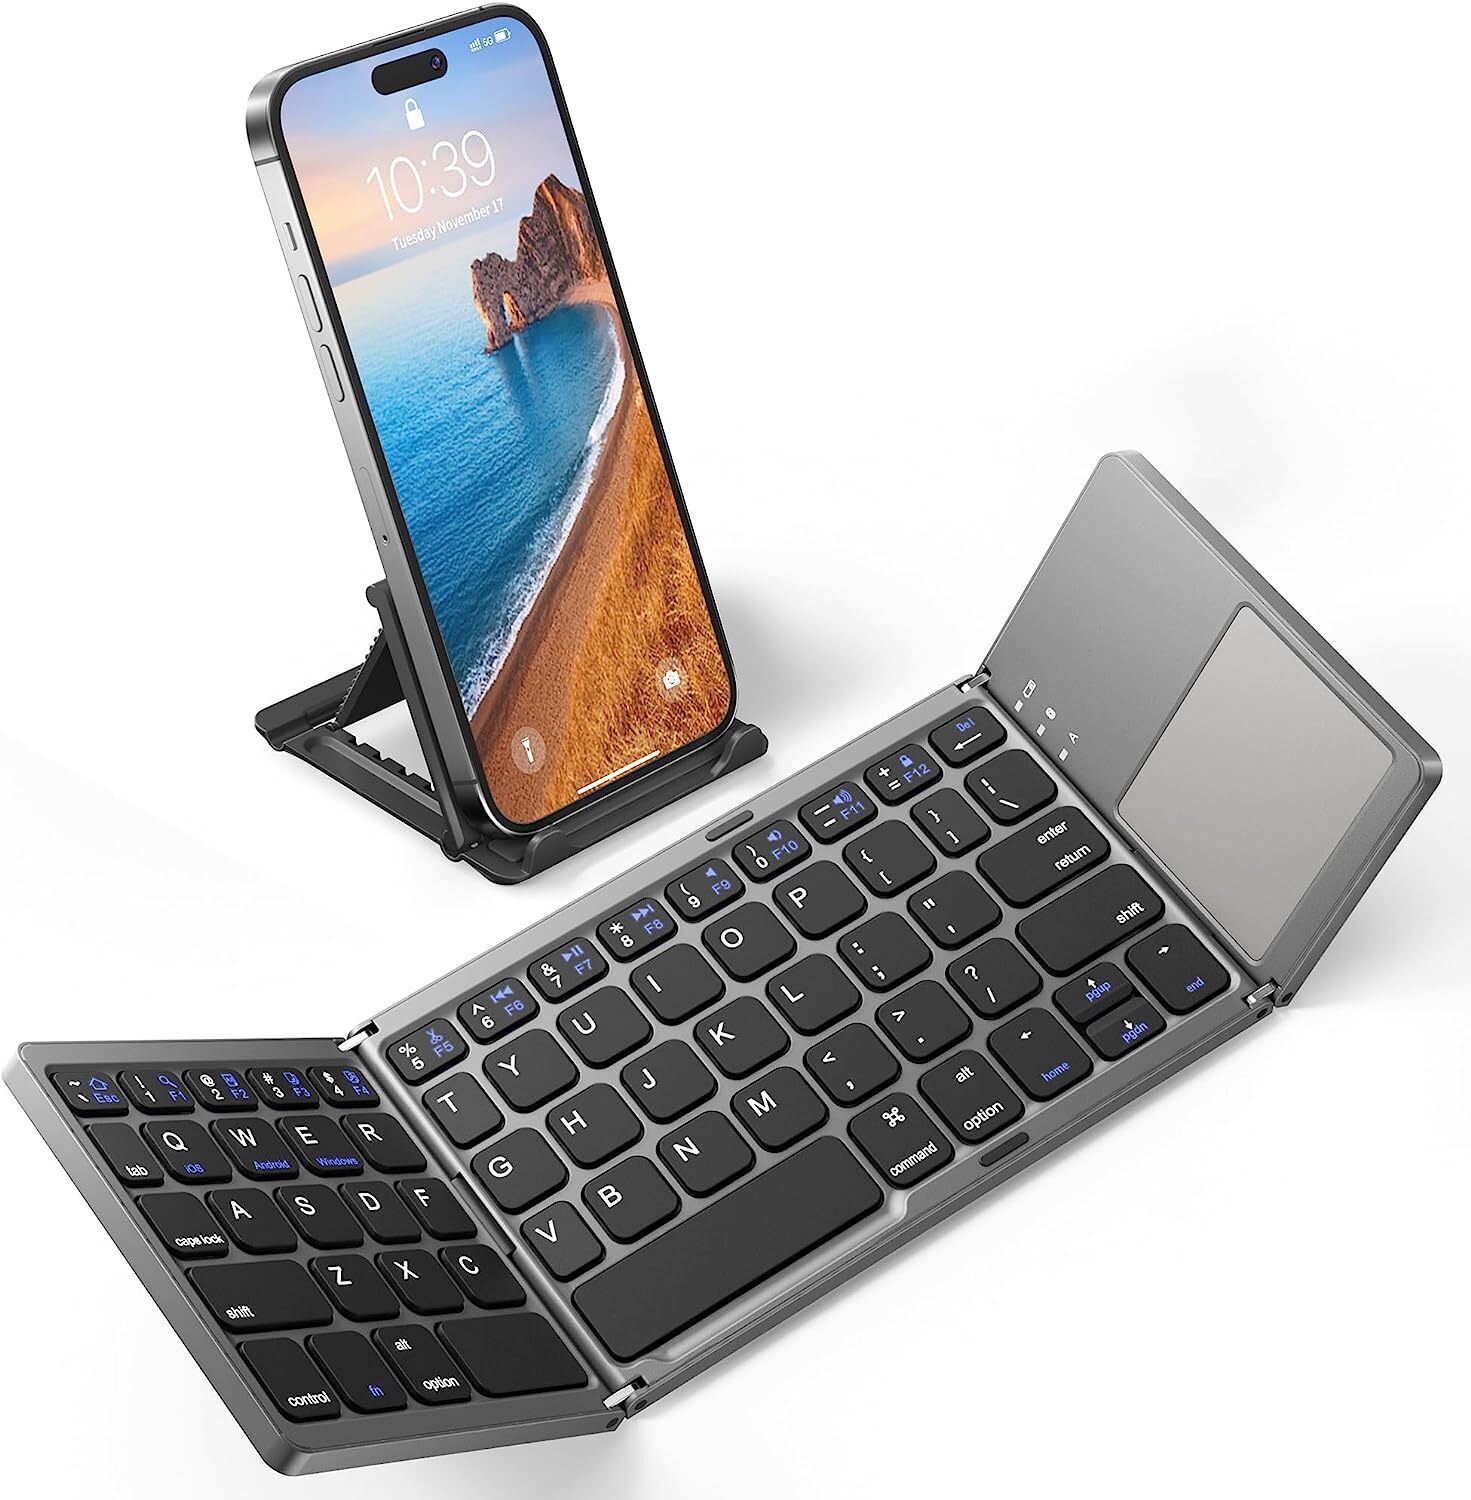 Mini Folding Wireless Bluetooth Keyboard With Touchpad for Phone Laptop US STOCK